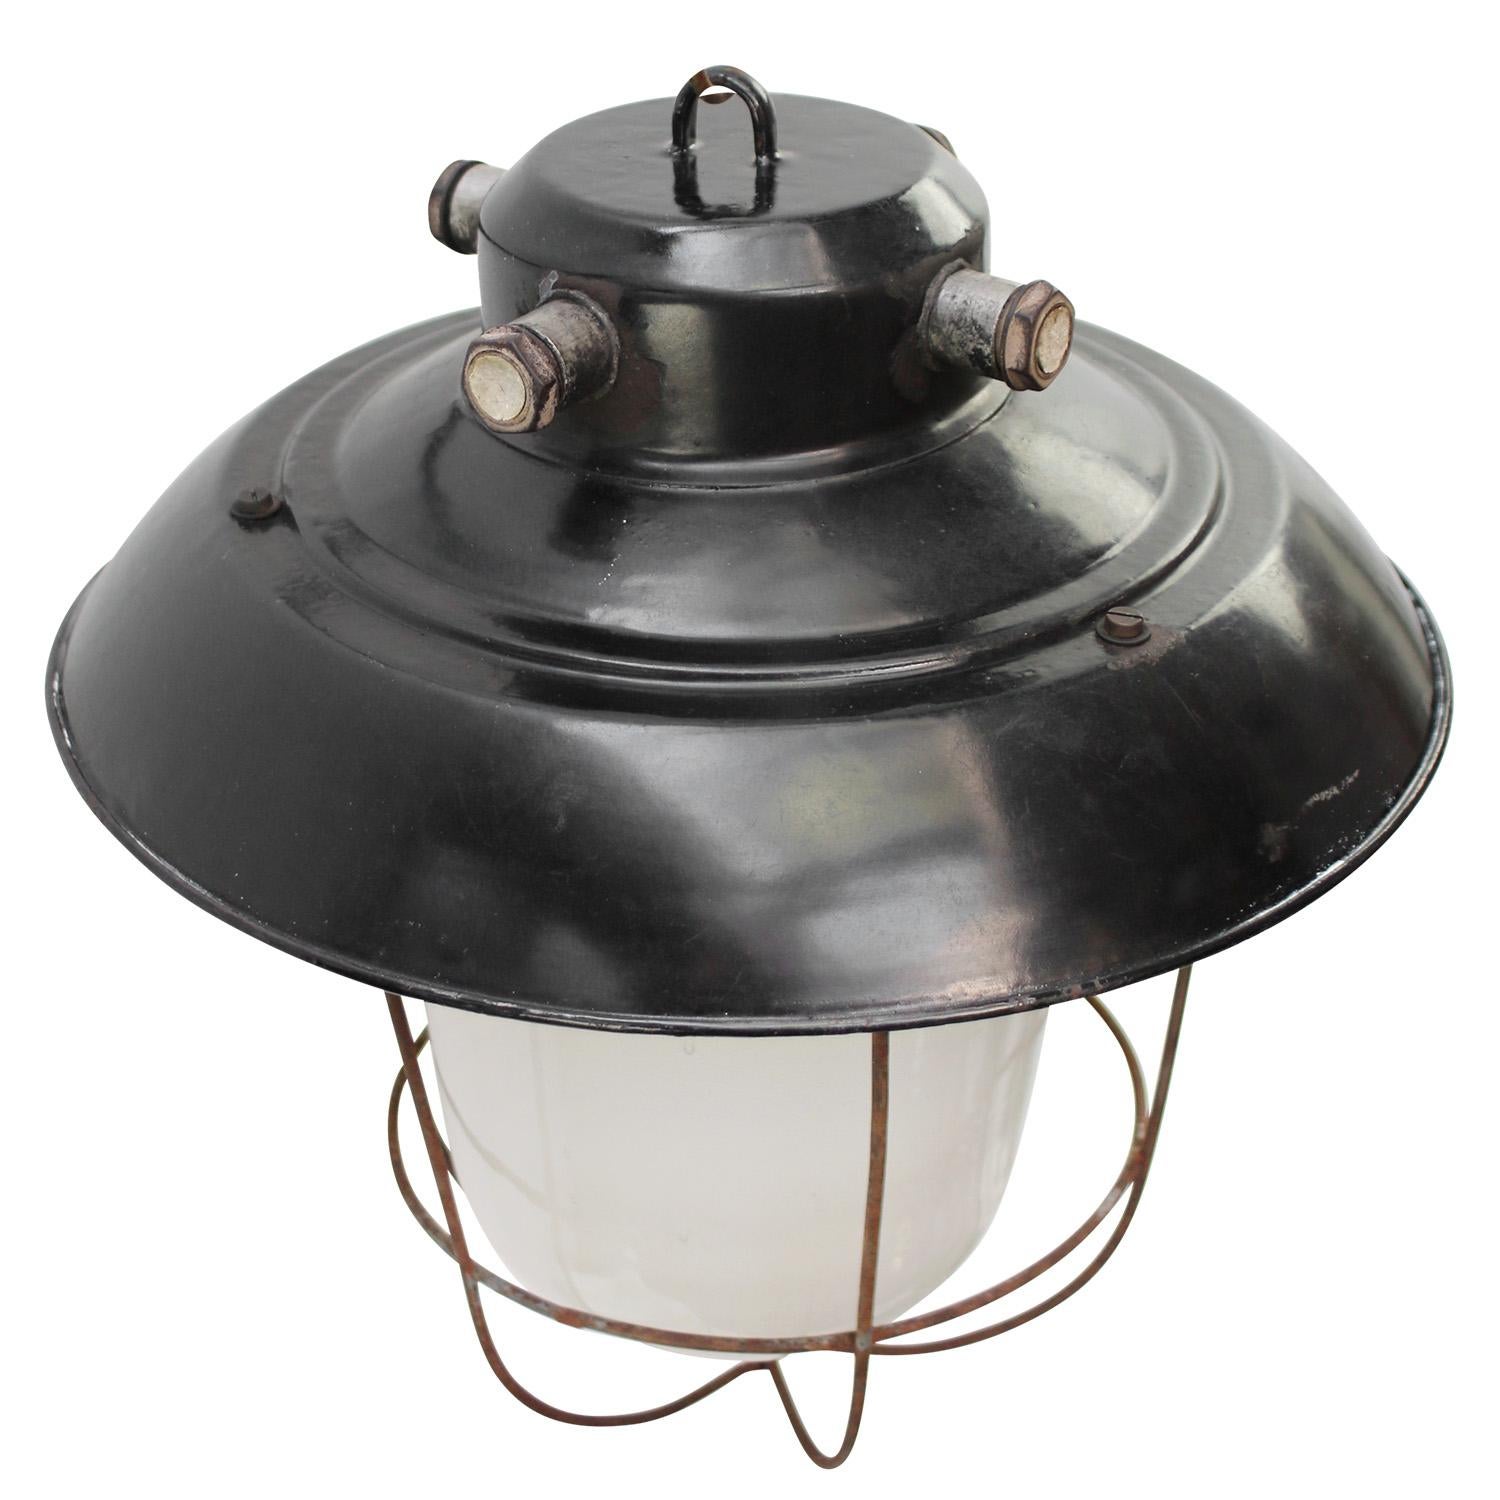 Black enamel industrial lamp. Frosted glass.

Weight 3.0 kg / 6.6 lb. 

Priced per individual item. All lamps have been made suitable by international standards for incandescent light bulbs, energy-efficient and LED bulbs. E26/E27 bulb holders and